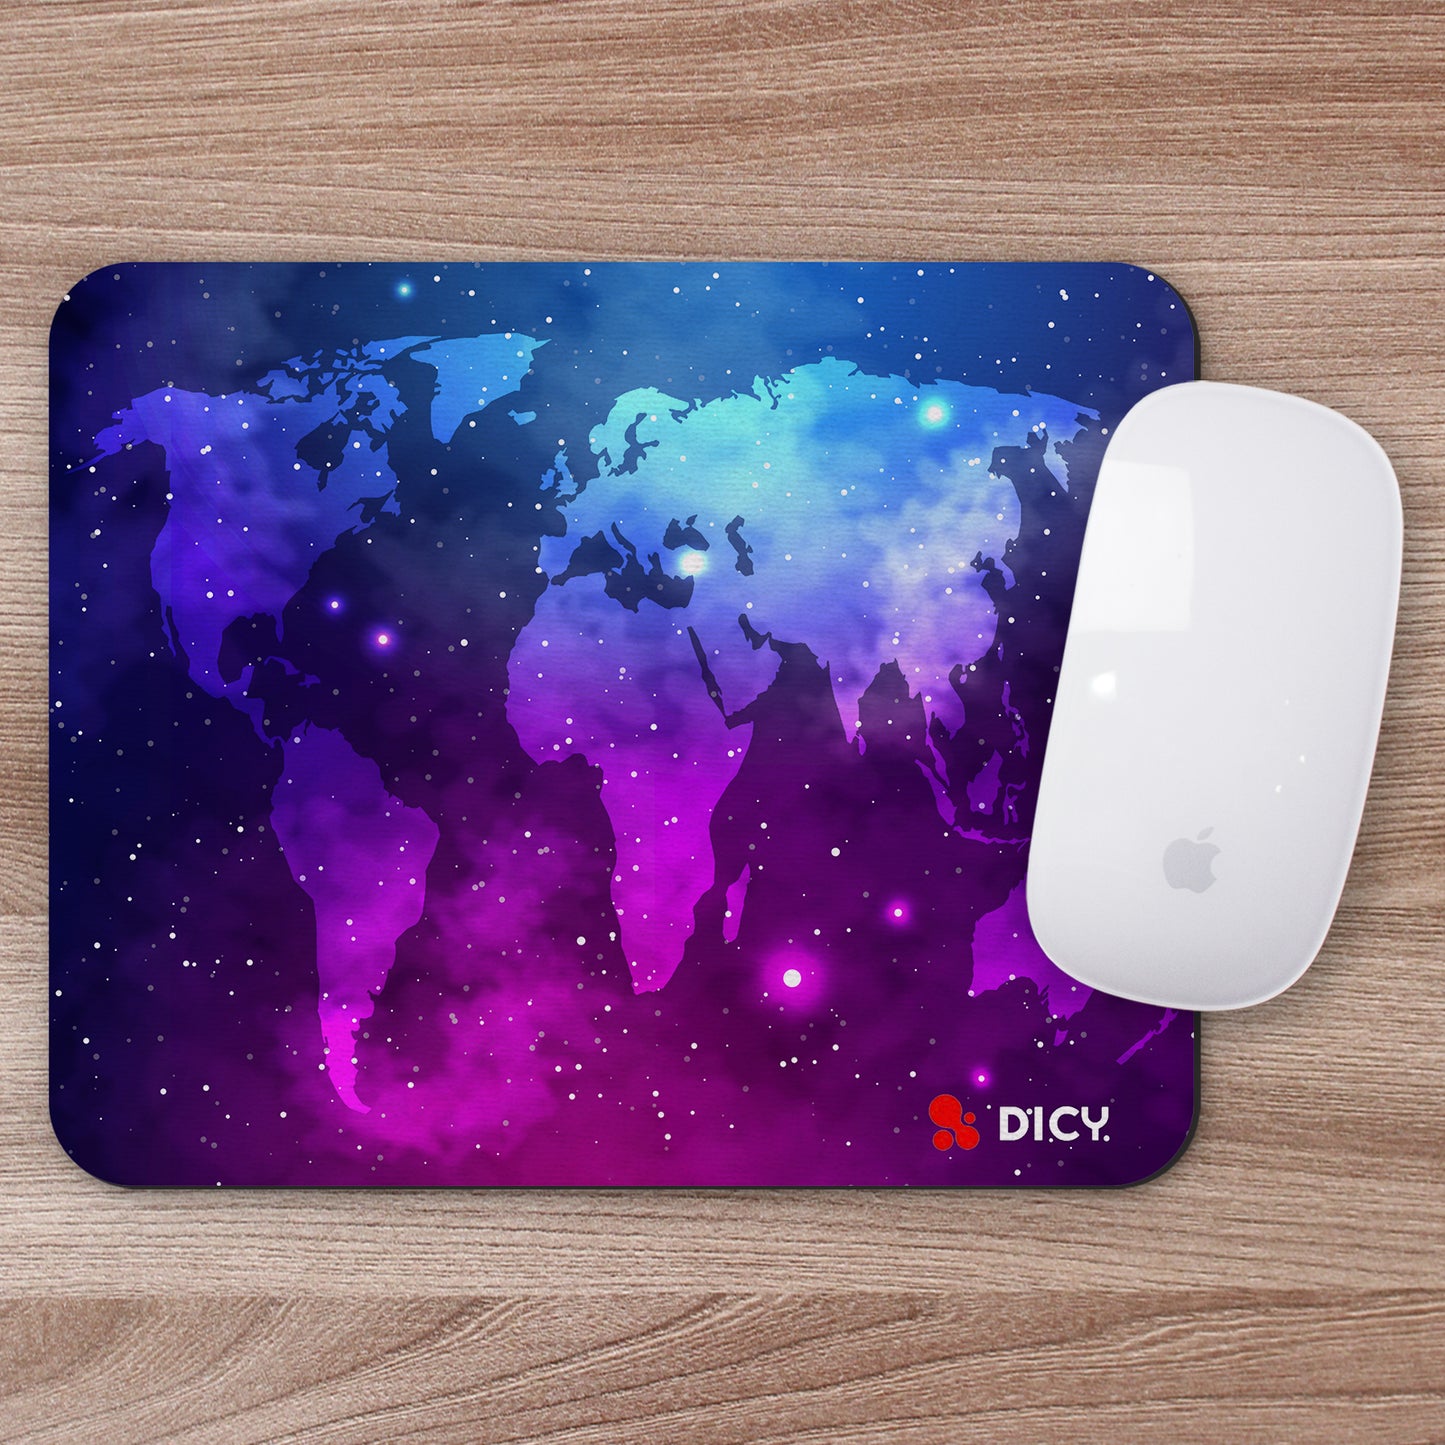 Mouse pad for Office Laptop/PC | World Maps